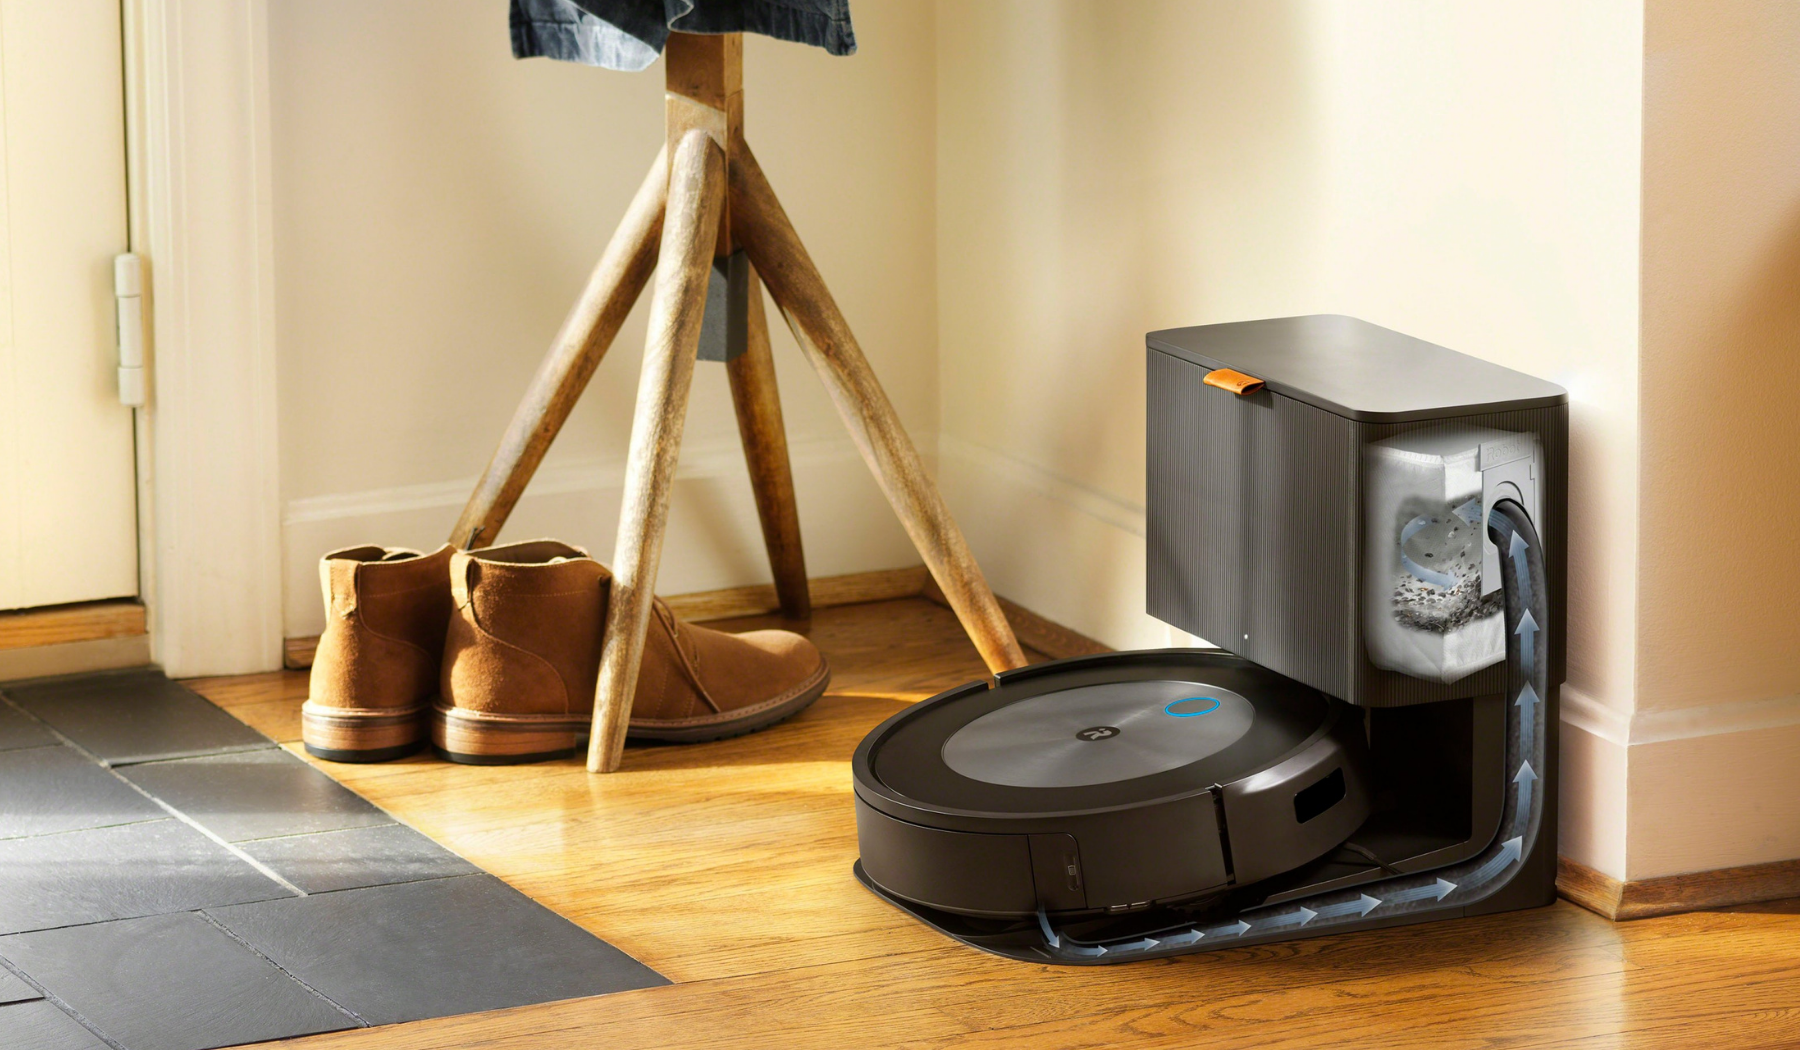 Self-emptying, LiDAR-equipped robot vacuums from iRobot and Shark are still under $400